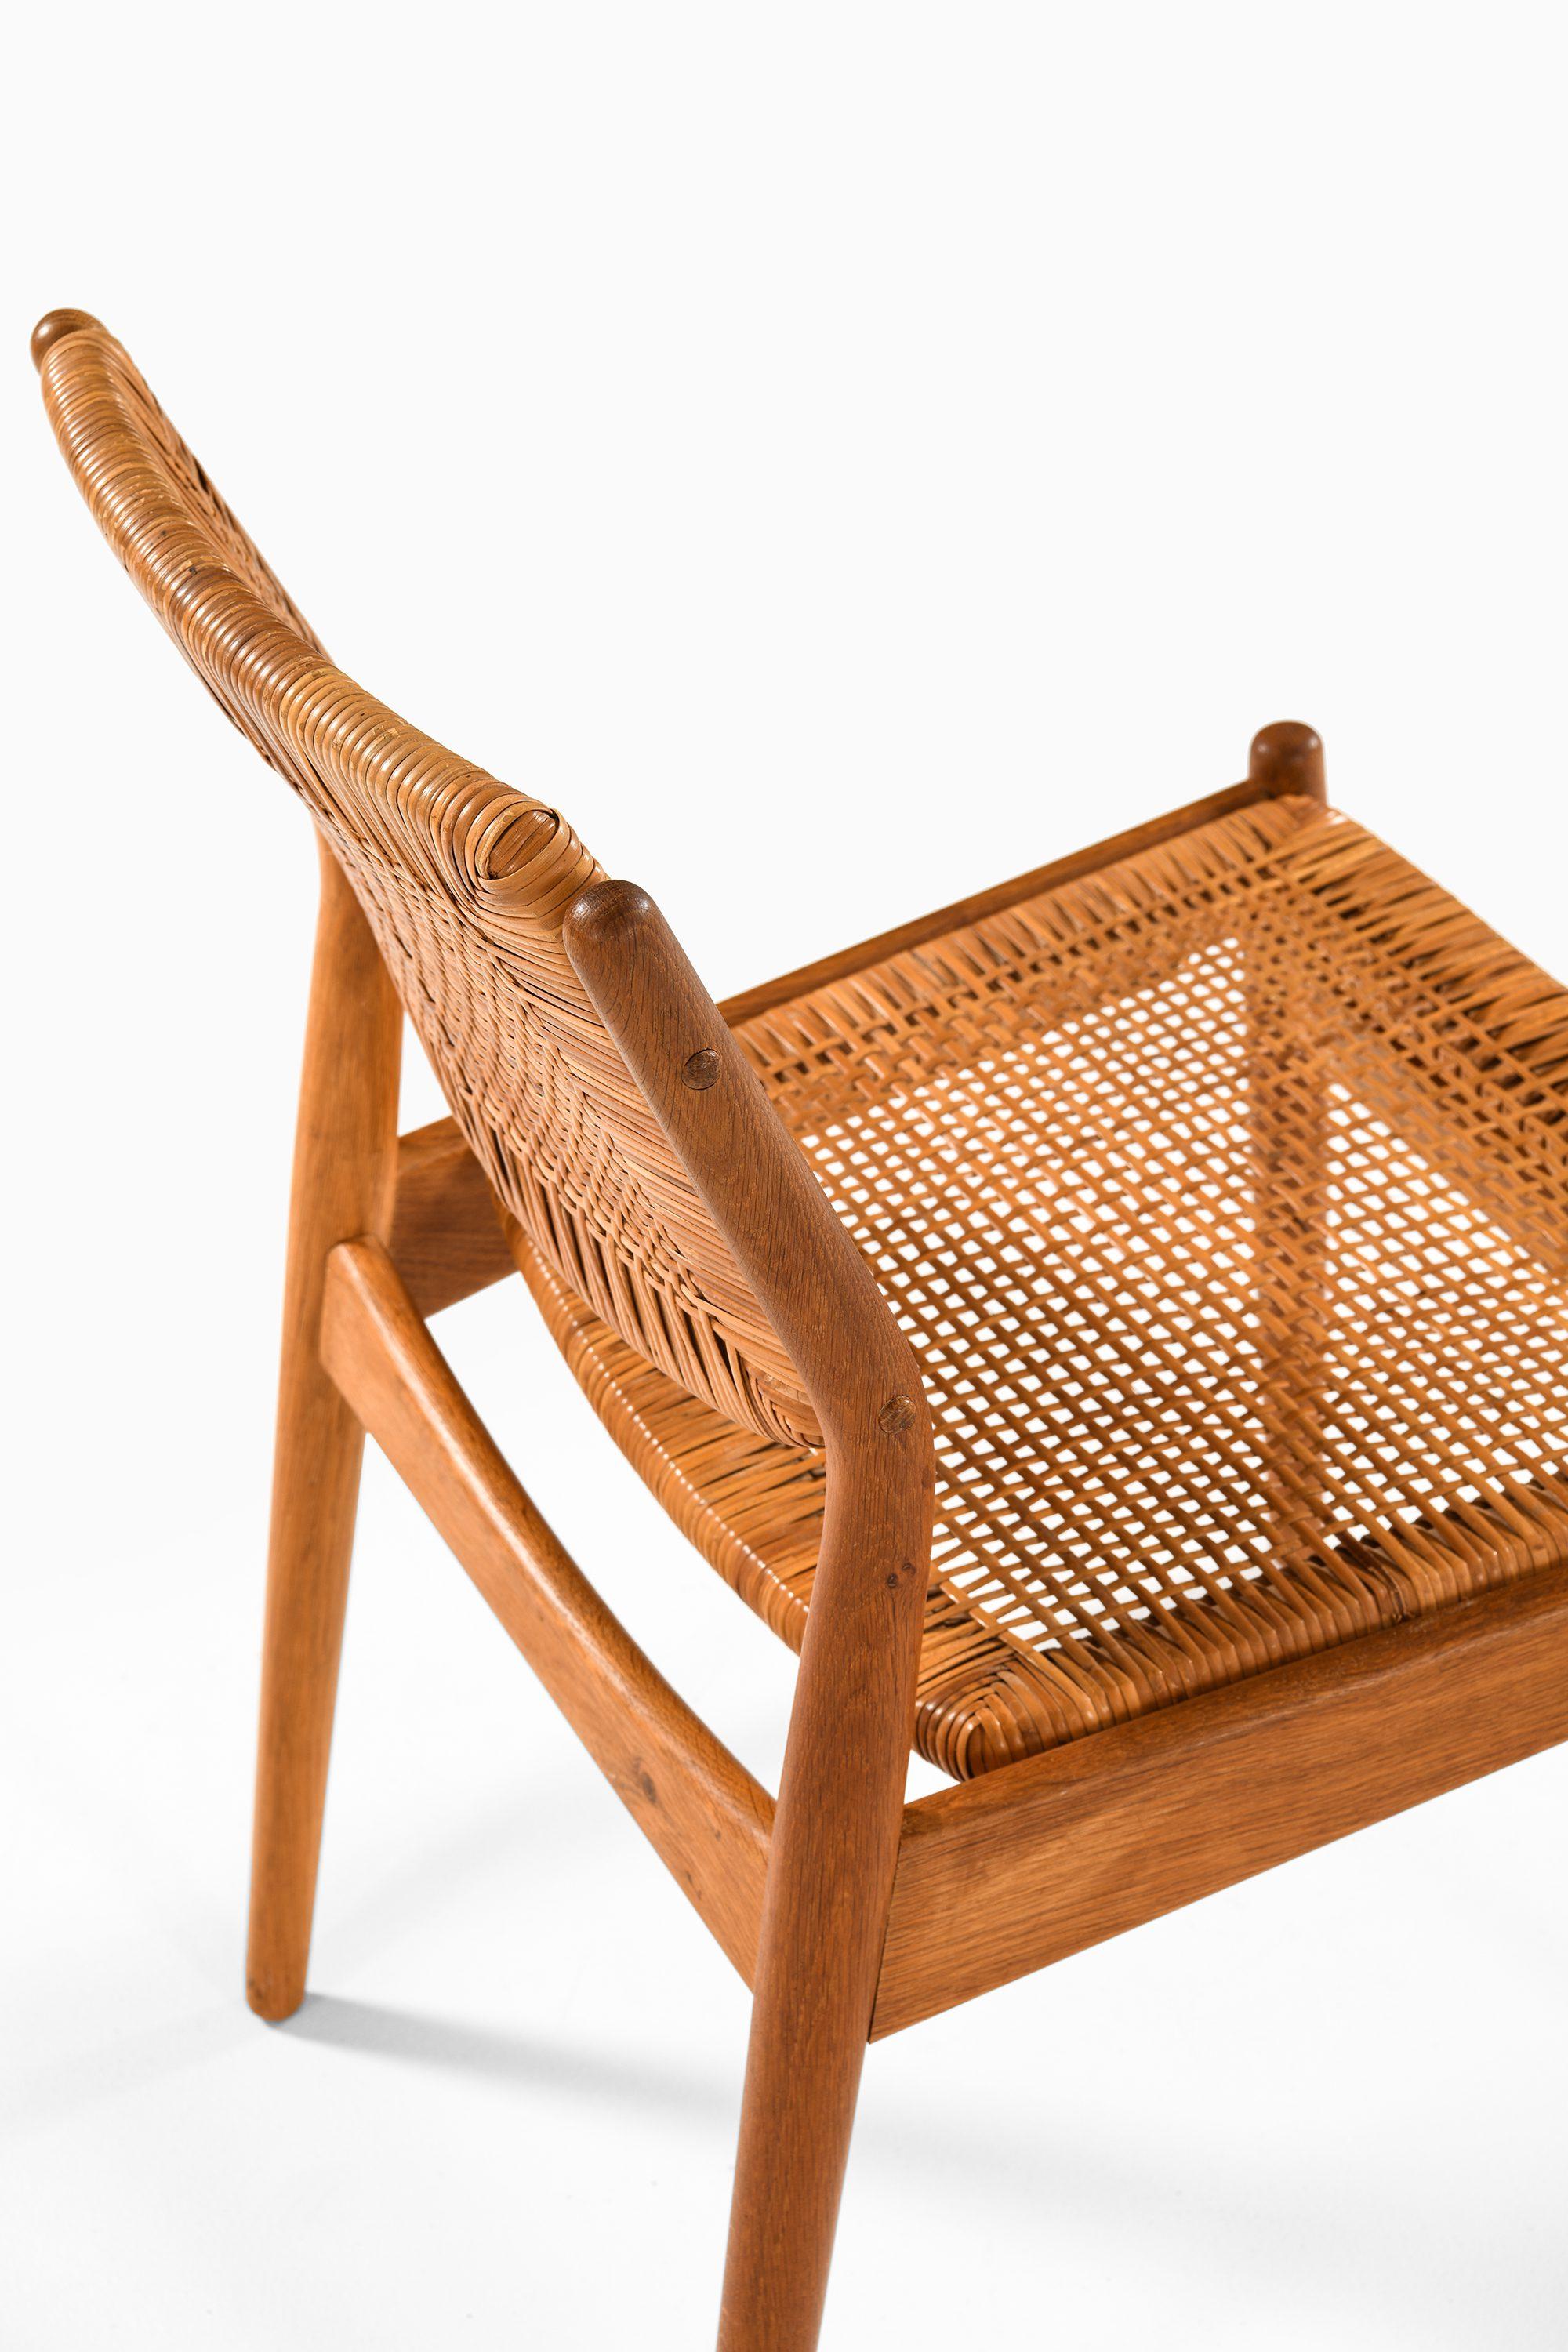 20th Century Set of 8 Dining Chairs in Oak and Woven Cane by Arne Vodder, 1951 For Sale